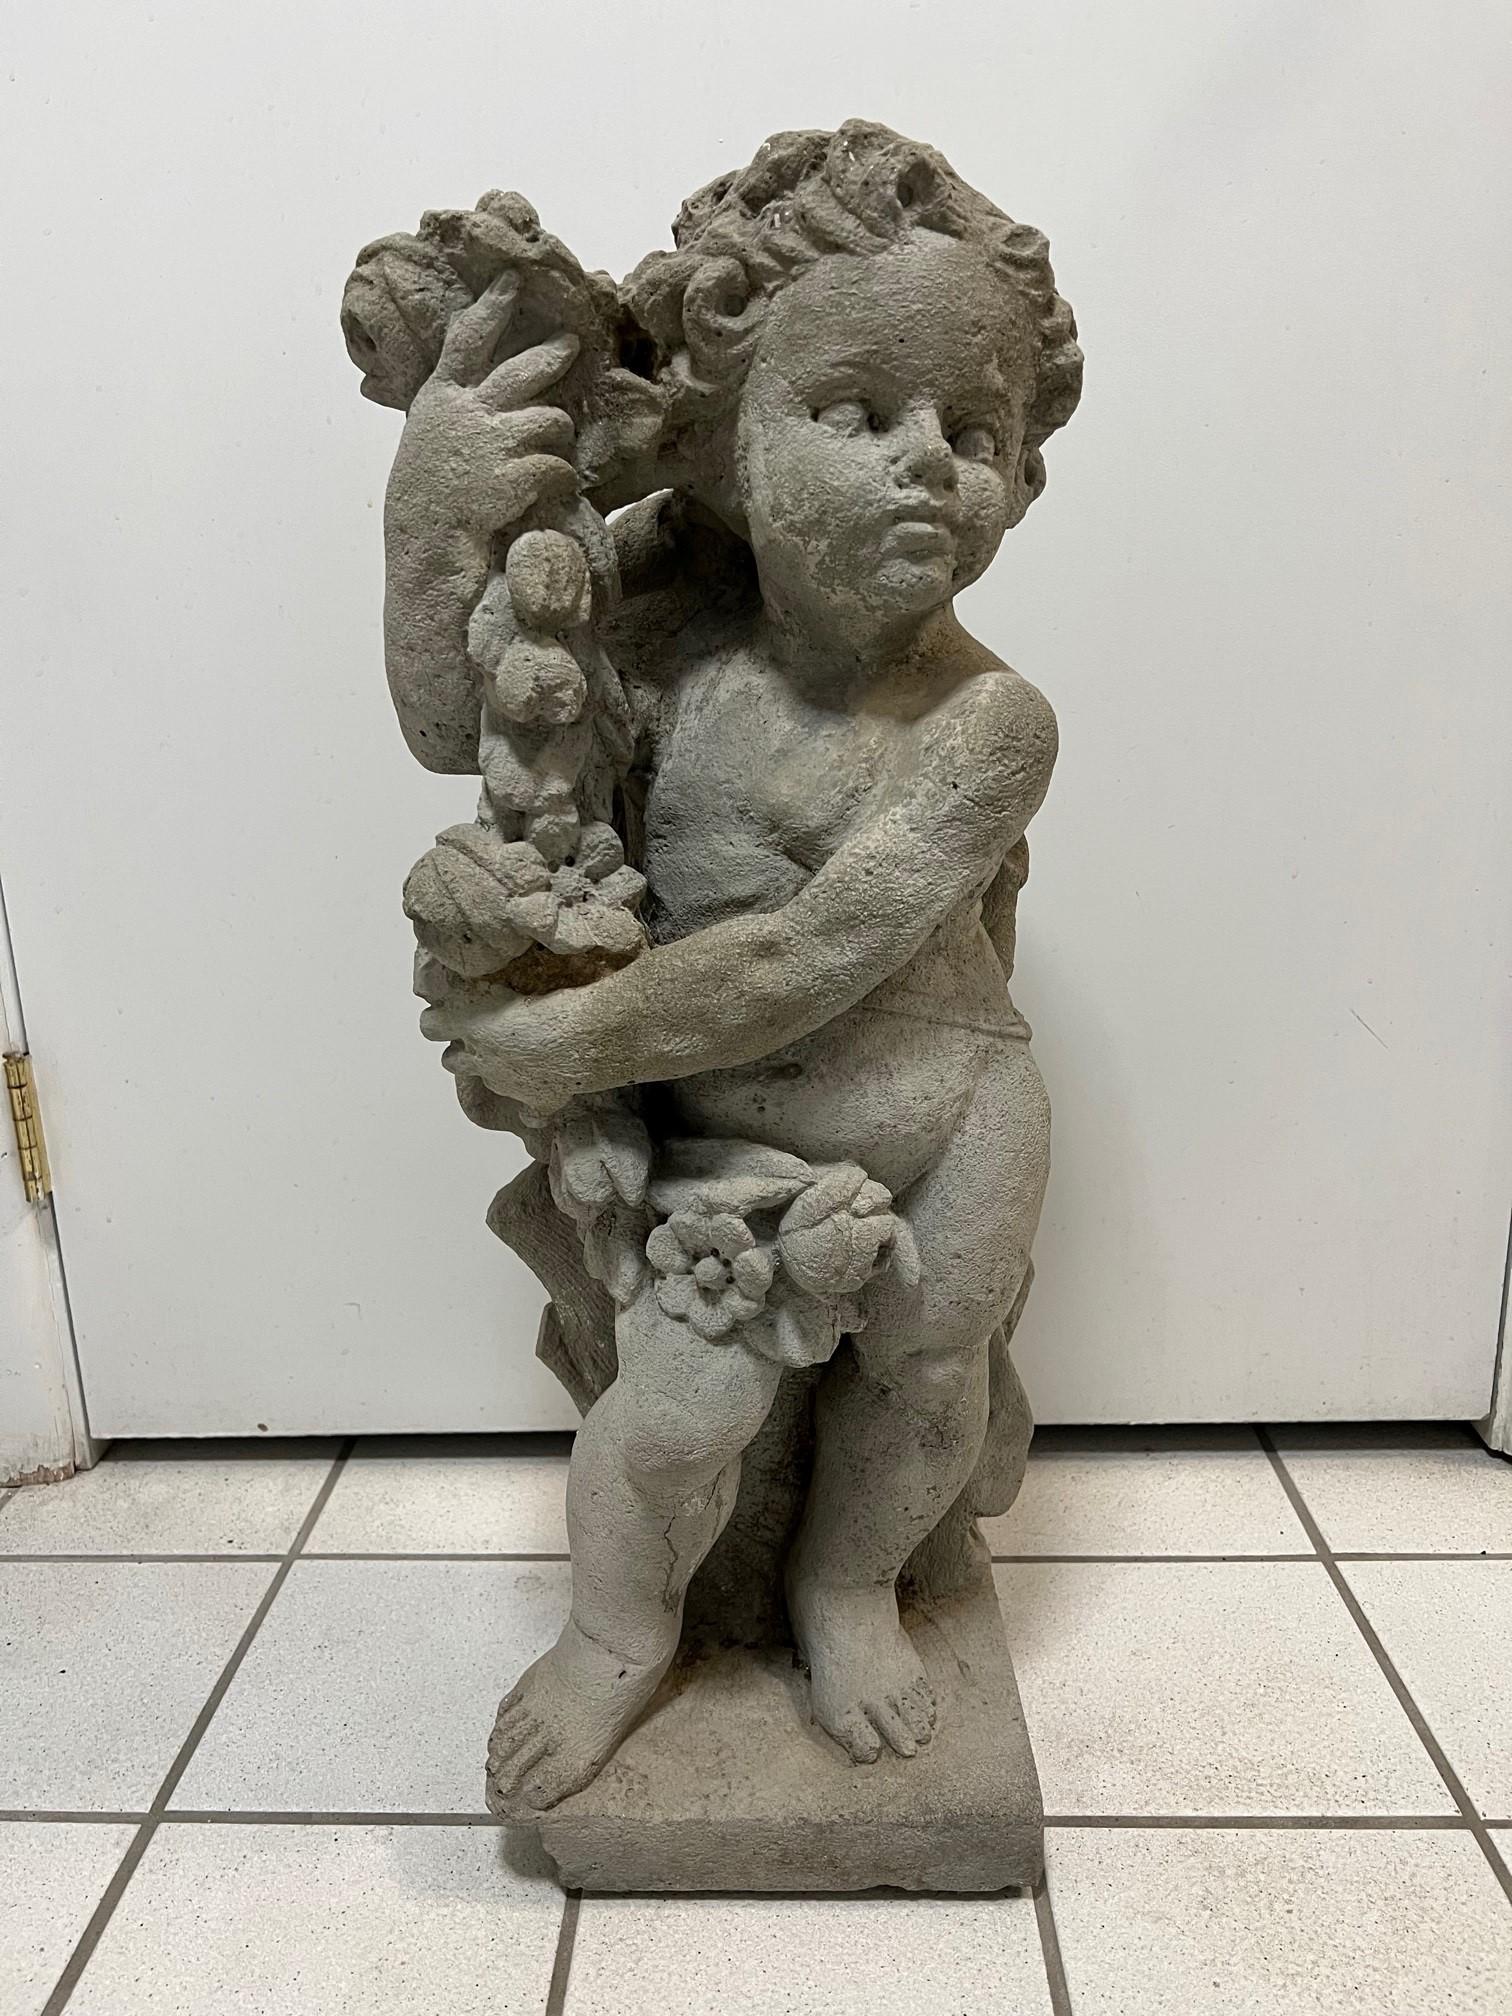 Vintage concrete garden cherub statue Spring, one of the four seasons holding a garland of flowers. Spring is all about new beginnings and transformations, it's a season that symbolizes starting fresh and starting over. This is a cast concrete